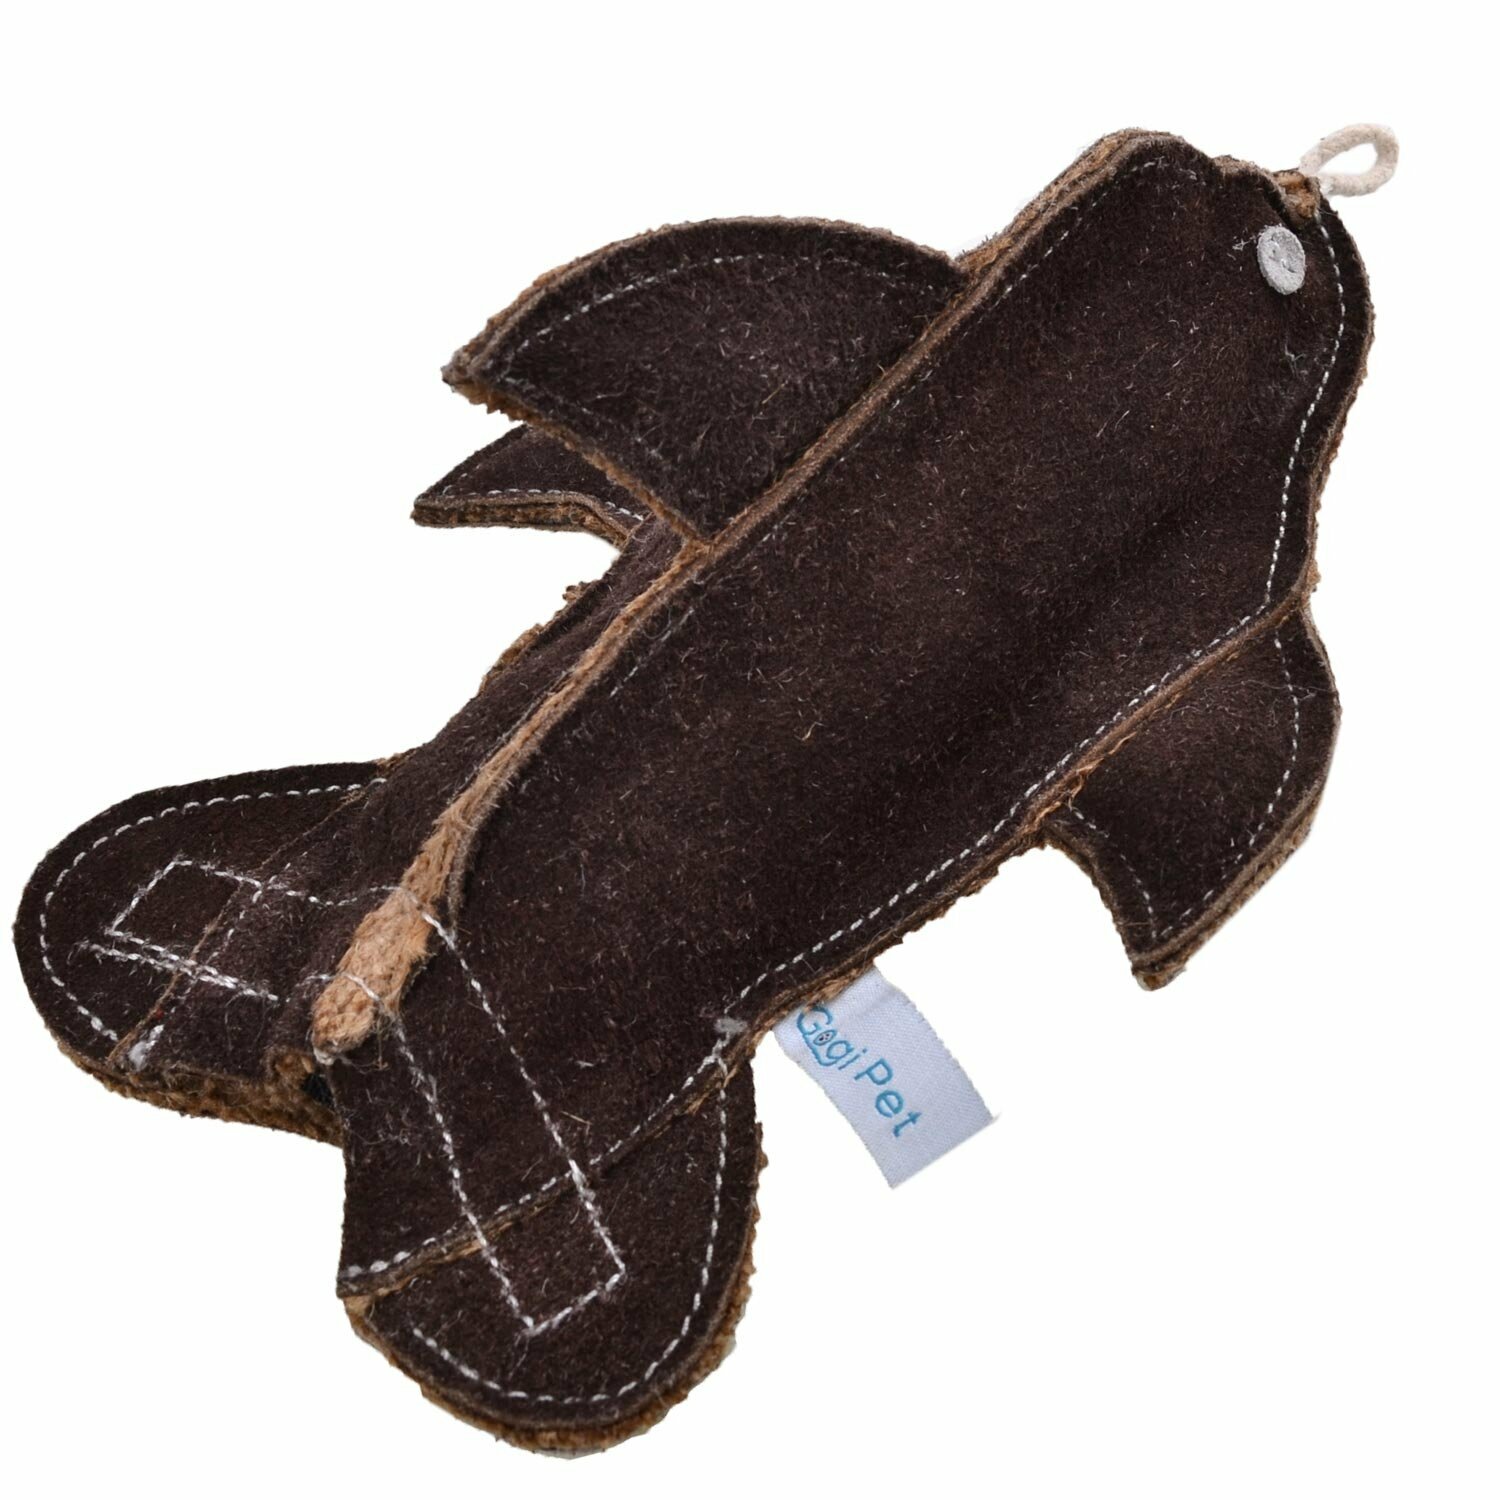 Brauner Dolphin dog toy - GogiPet ® Dog toy made of sustainable raw materials